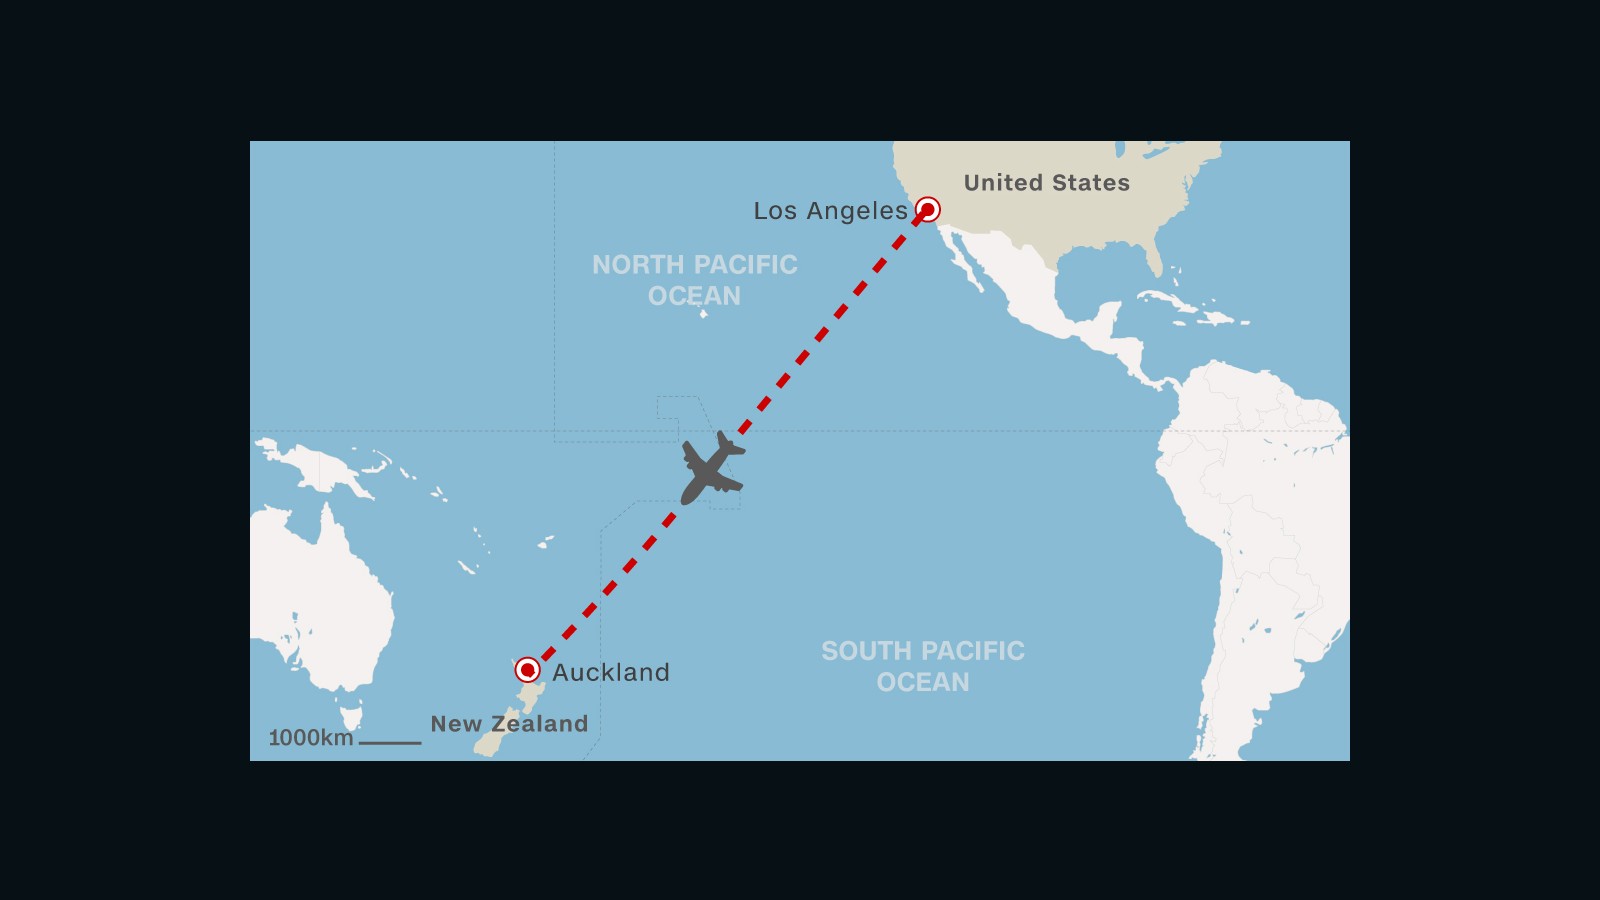 American Airlines Sets Up Direct L.a.-Auckland Route | Cnn Travel